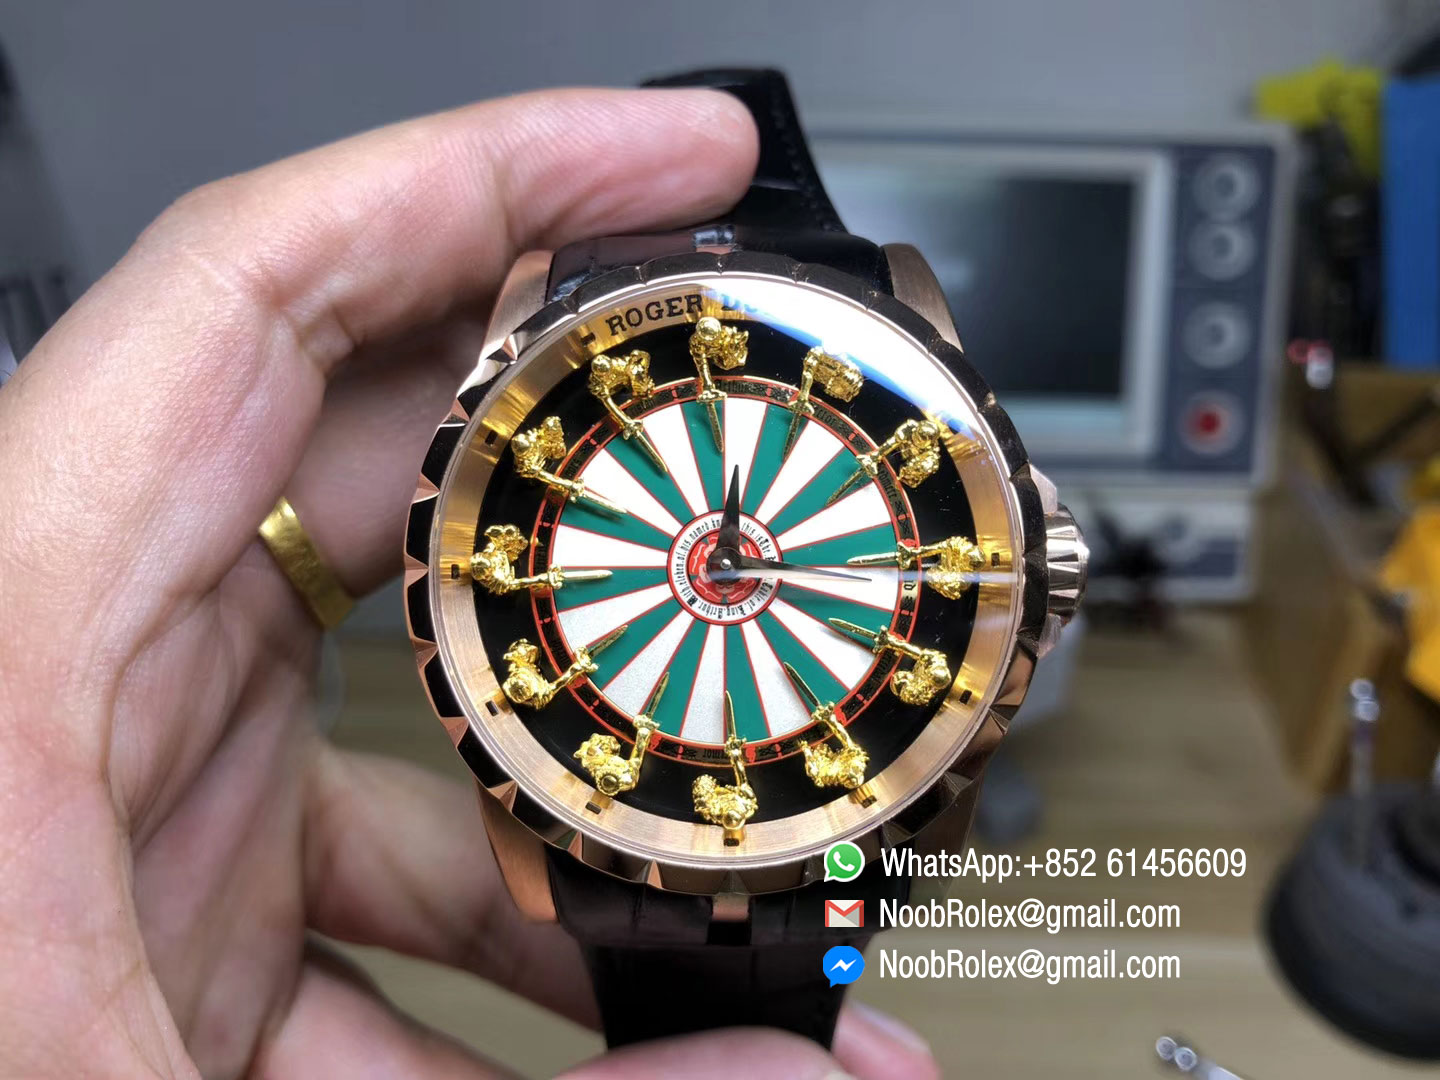 Часы рыцари круглого. Roger Dubuis Рыцари круглого стола. Roger Dubuis Excalibur Knights of the Round Table 2. Roger Dubuis Excalibur Knights Round Table 45 rddbex0511.